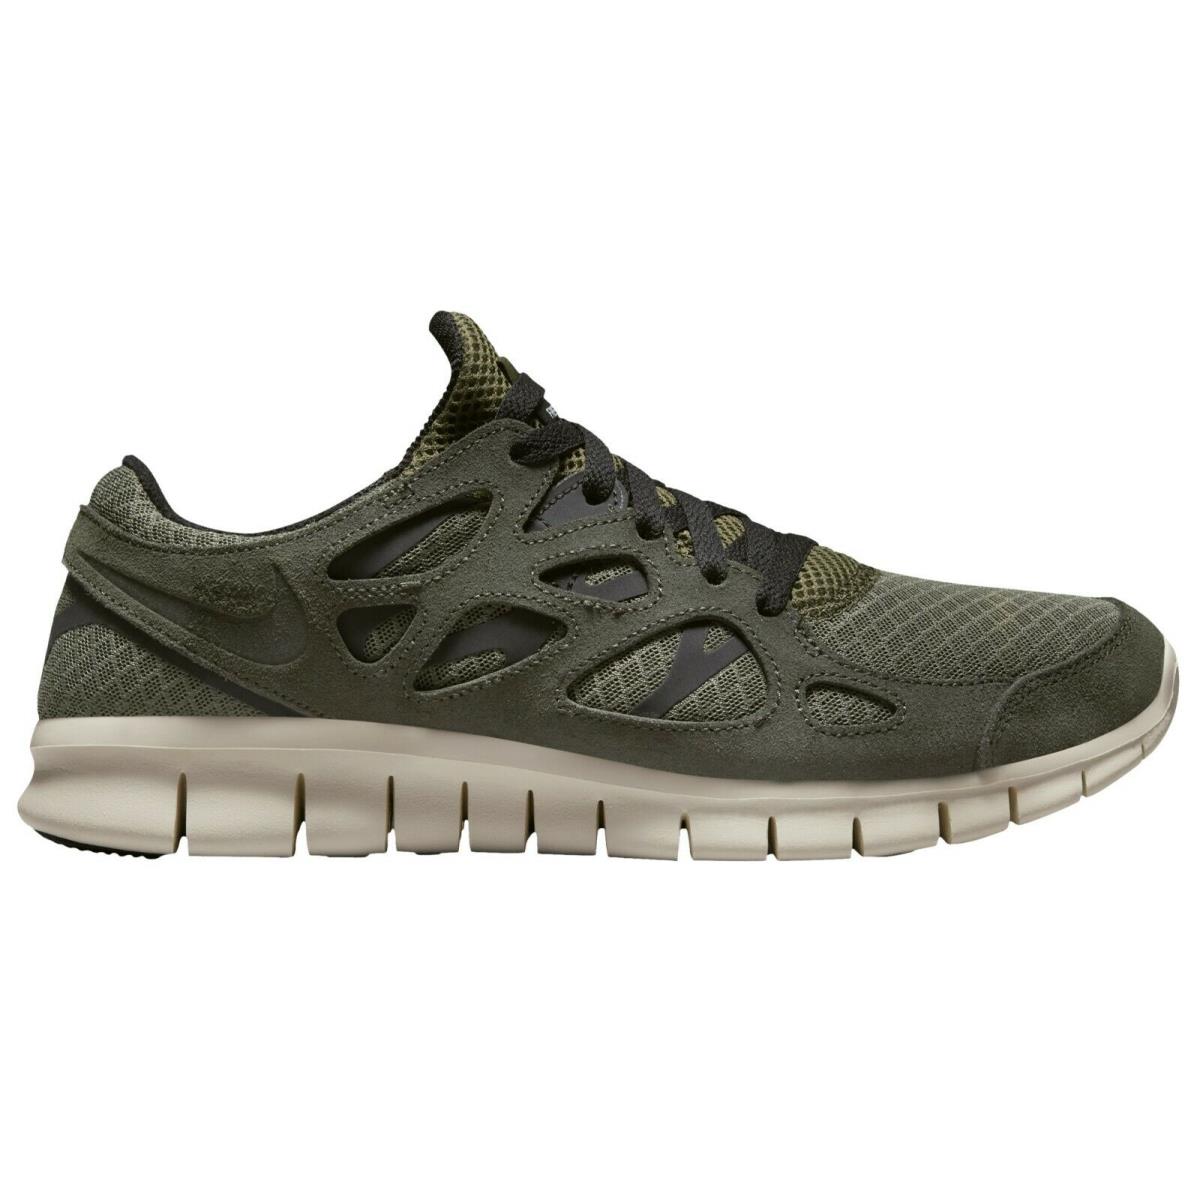 Nike Free Run 2 Mens 537732-305 Sequoia Olive Sail Black Running Shoes Size 13